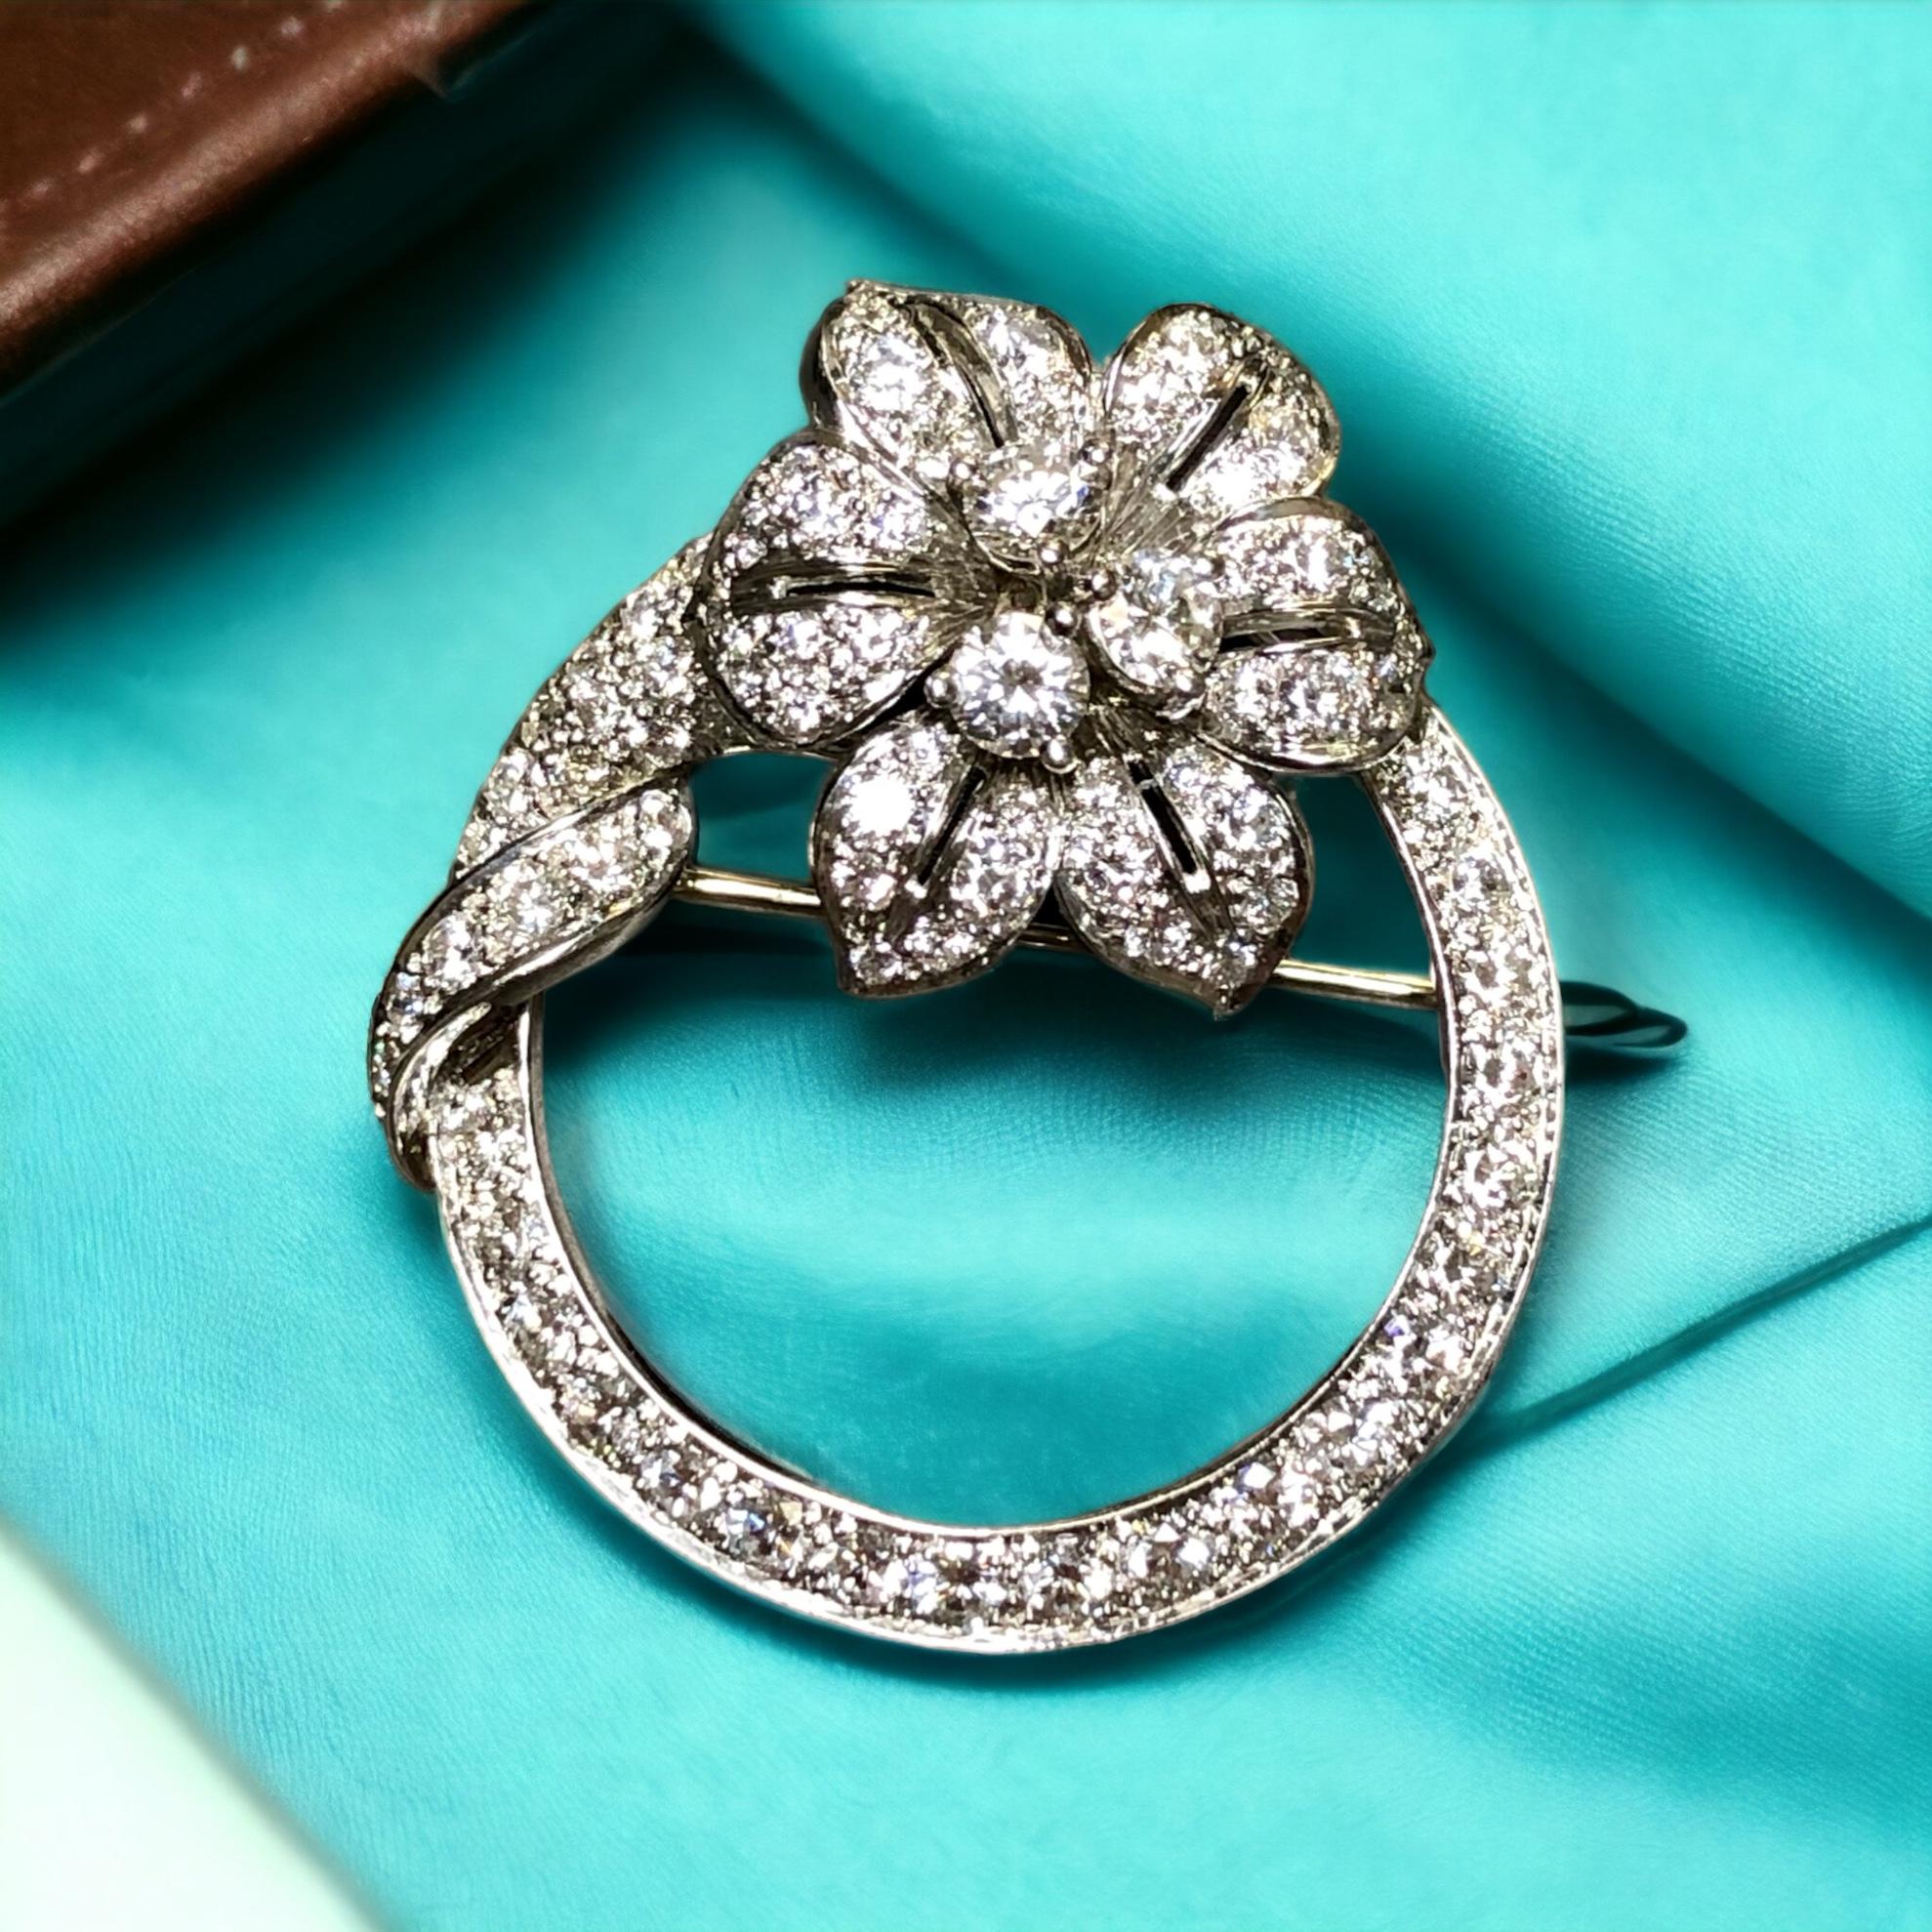 An original Tiffany & Co brooch c. 1960’s signed and numbered done in platinum and set with approximately 3.55cttw in F-G color Vs1+ clarity round diamonds. The work is exquisite as one would expect and the condition is absolutely perfect. This